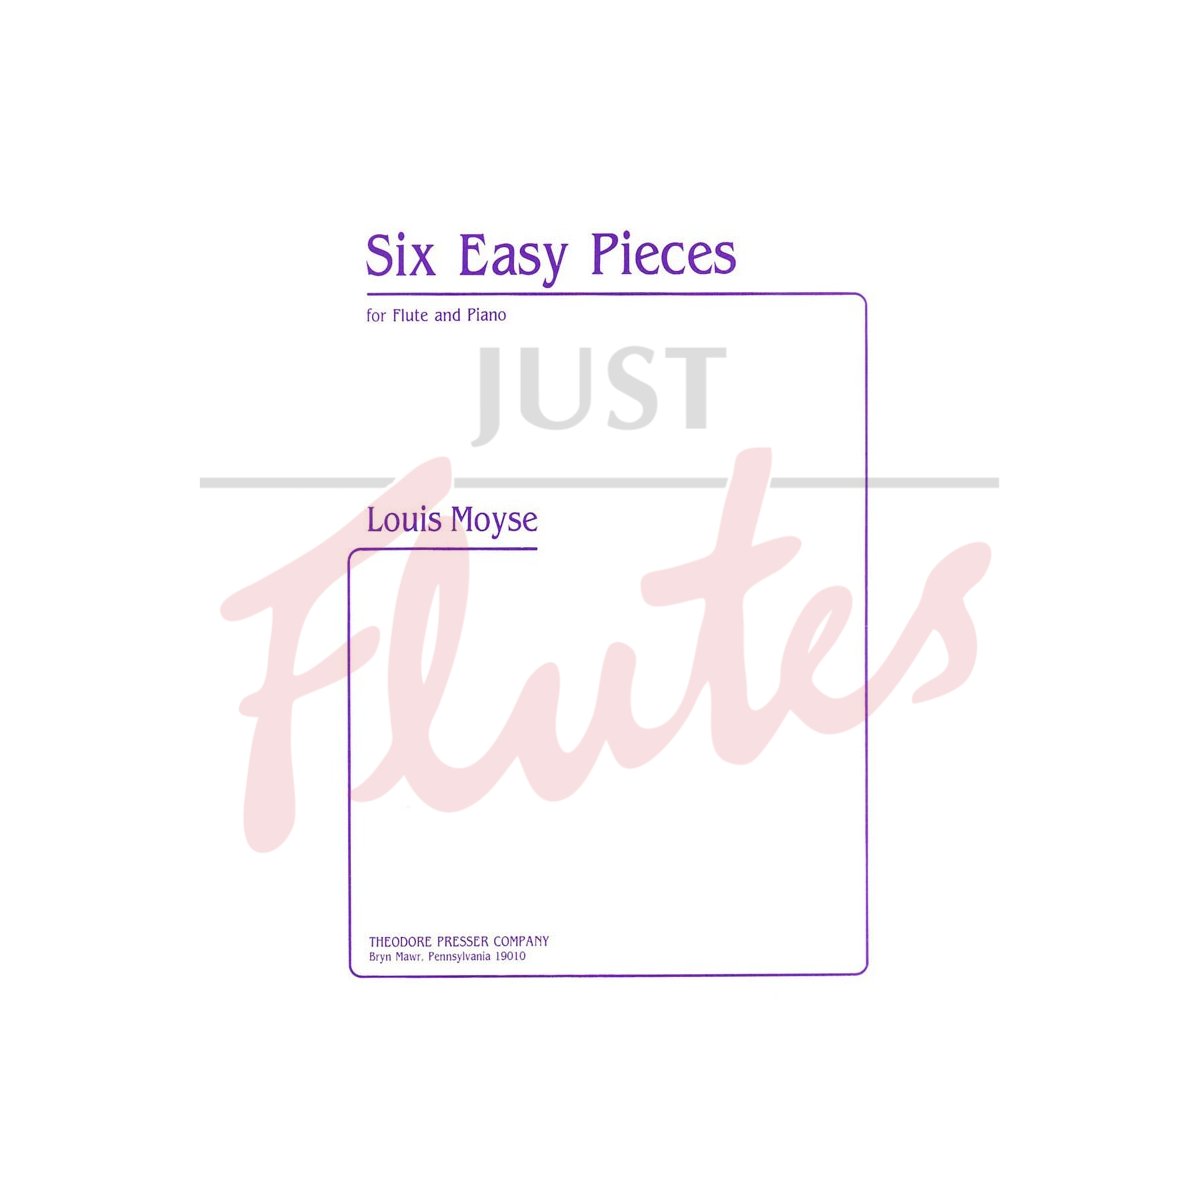 Six Easy Pieces for Flute and Piano